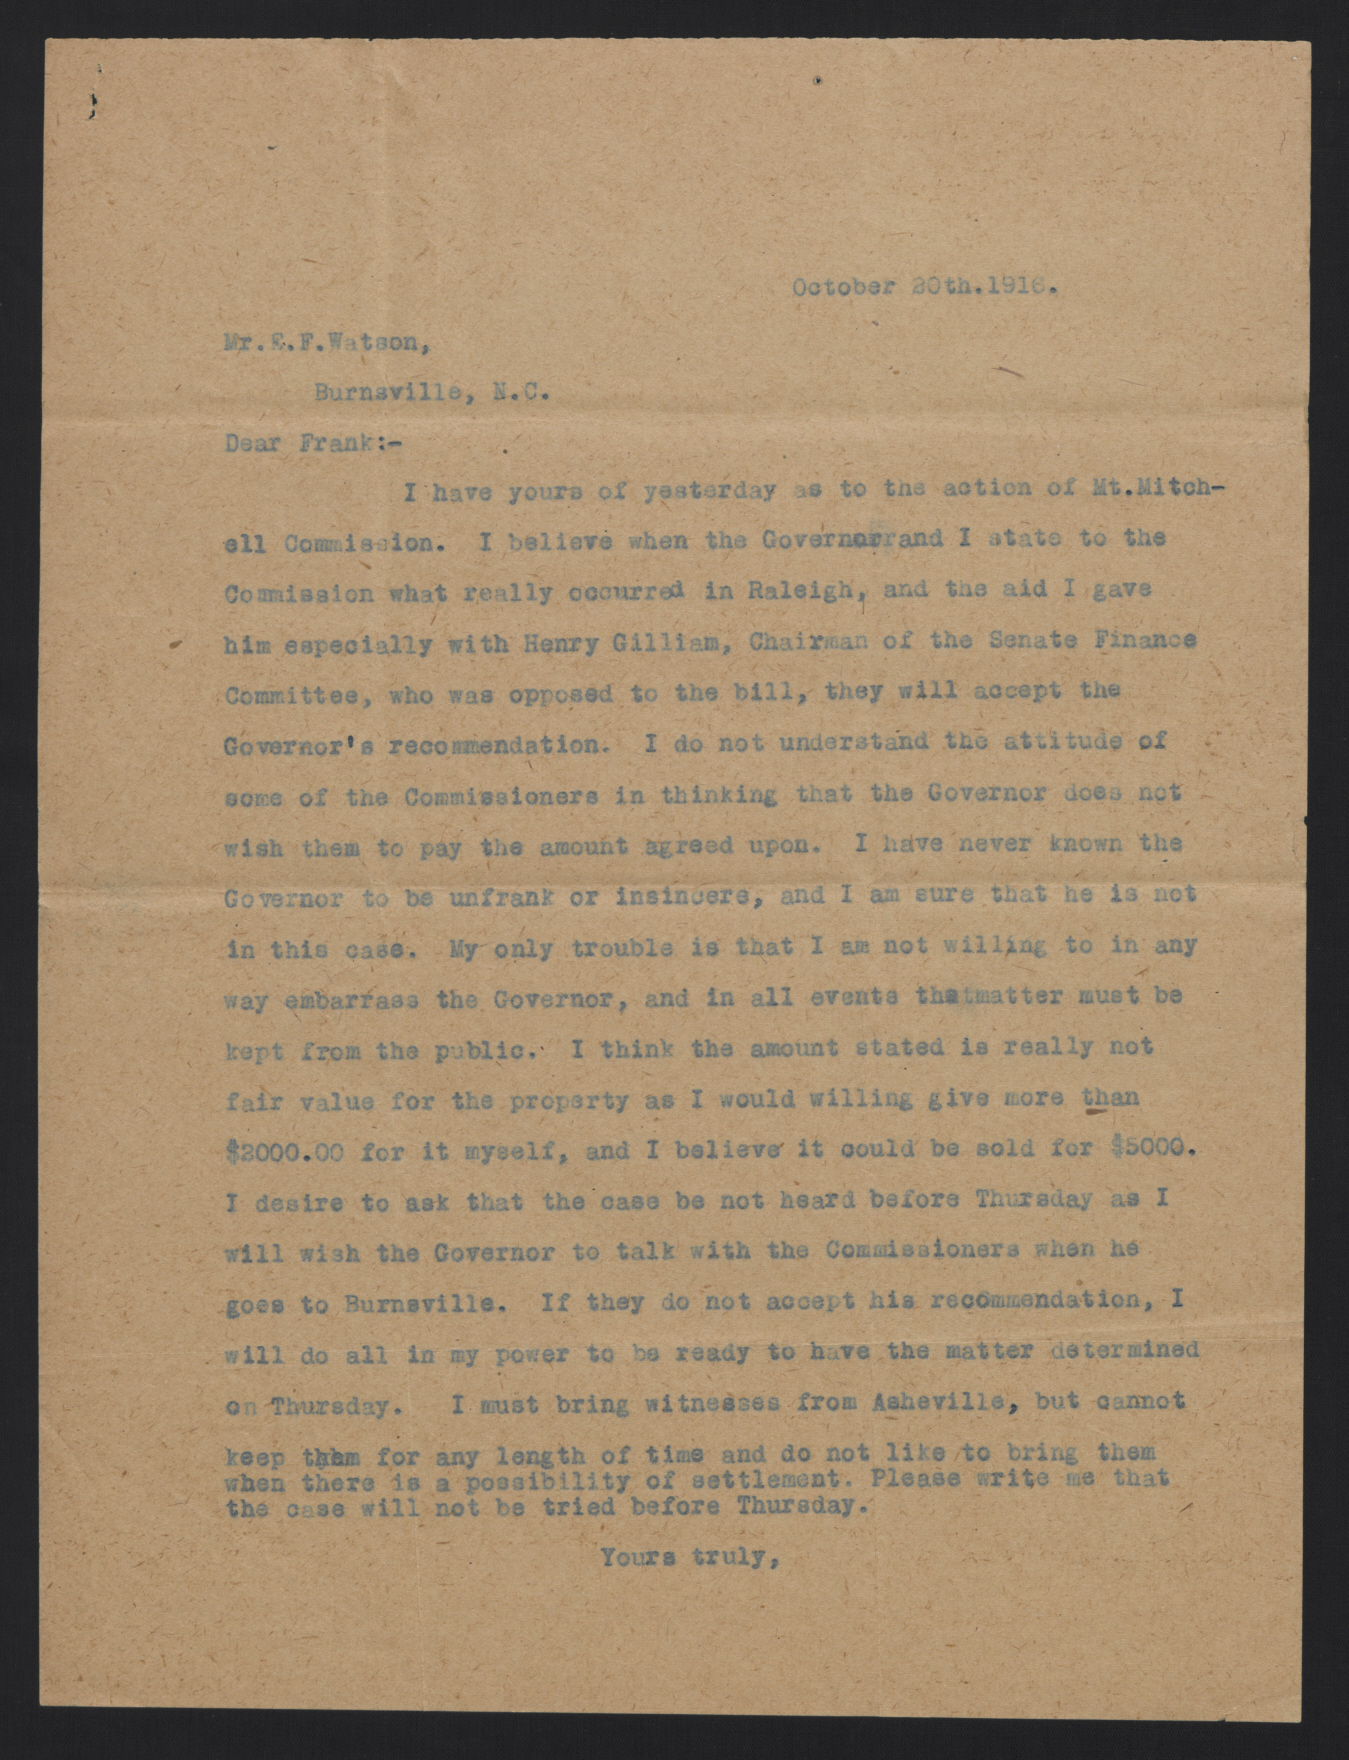 Letter from Unknown Author to Watson, October 20, 1916